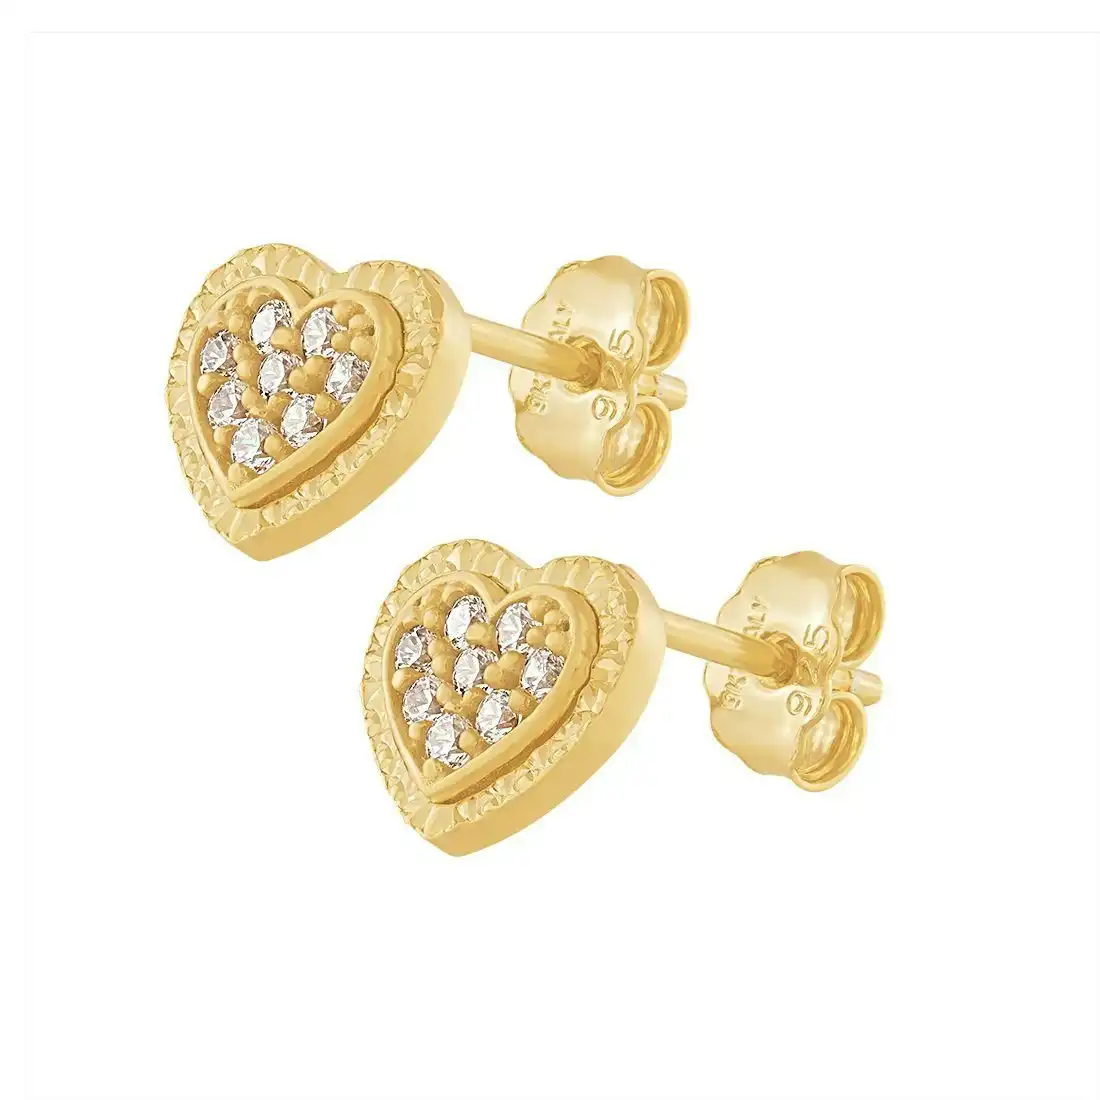 9ct Yellow Gold Silver Infused Heart Stud Earrings with Cubic Zircona